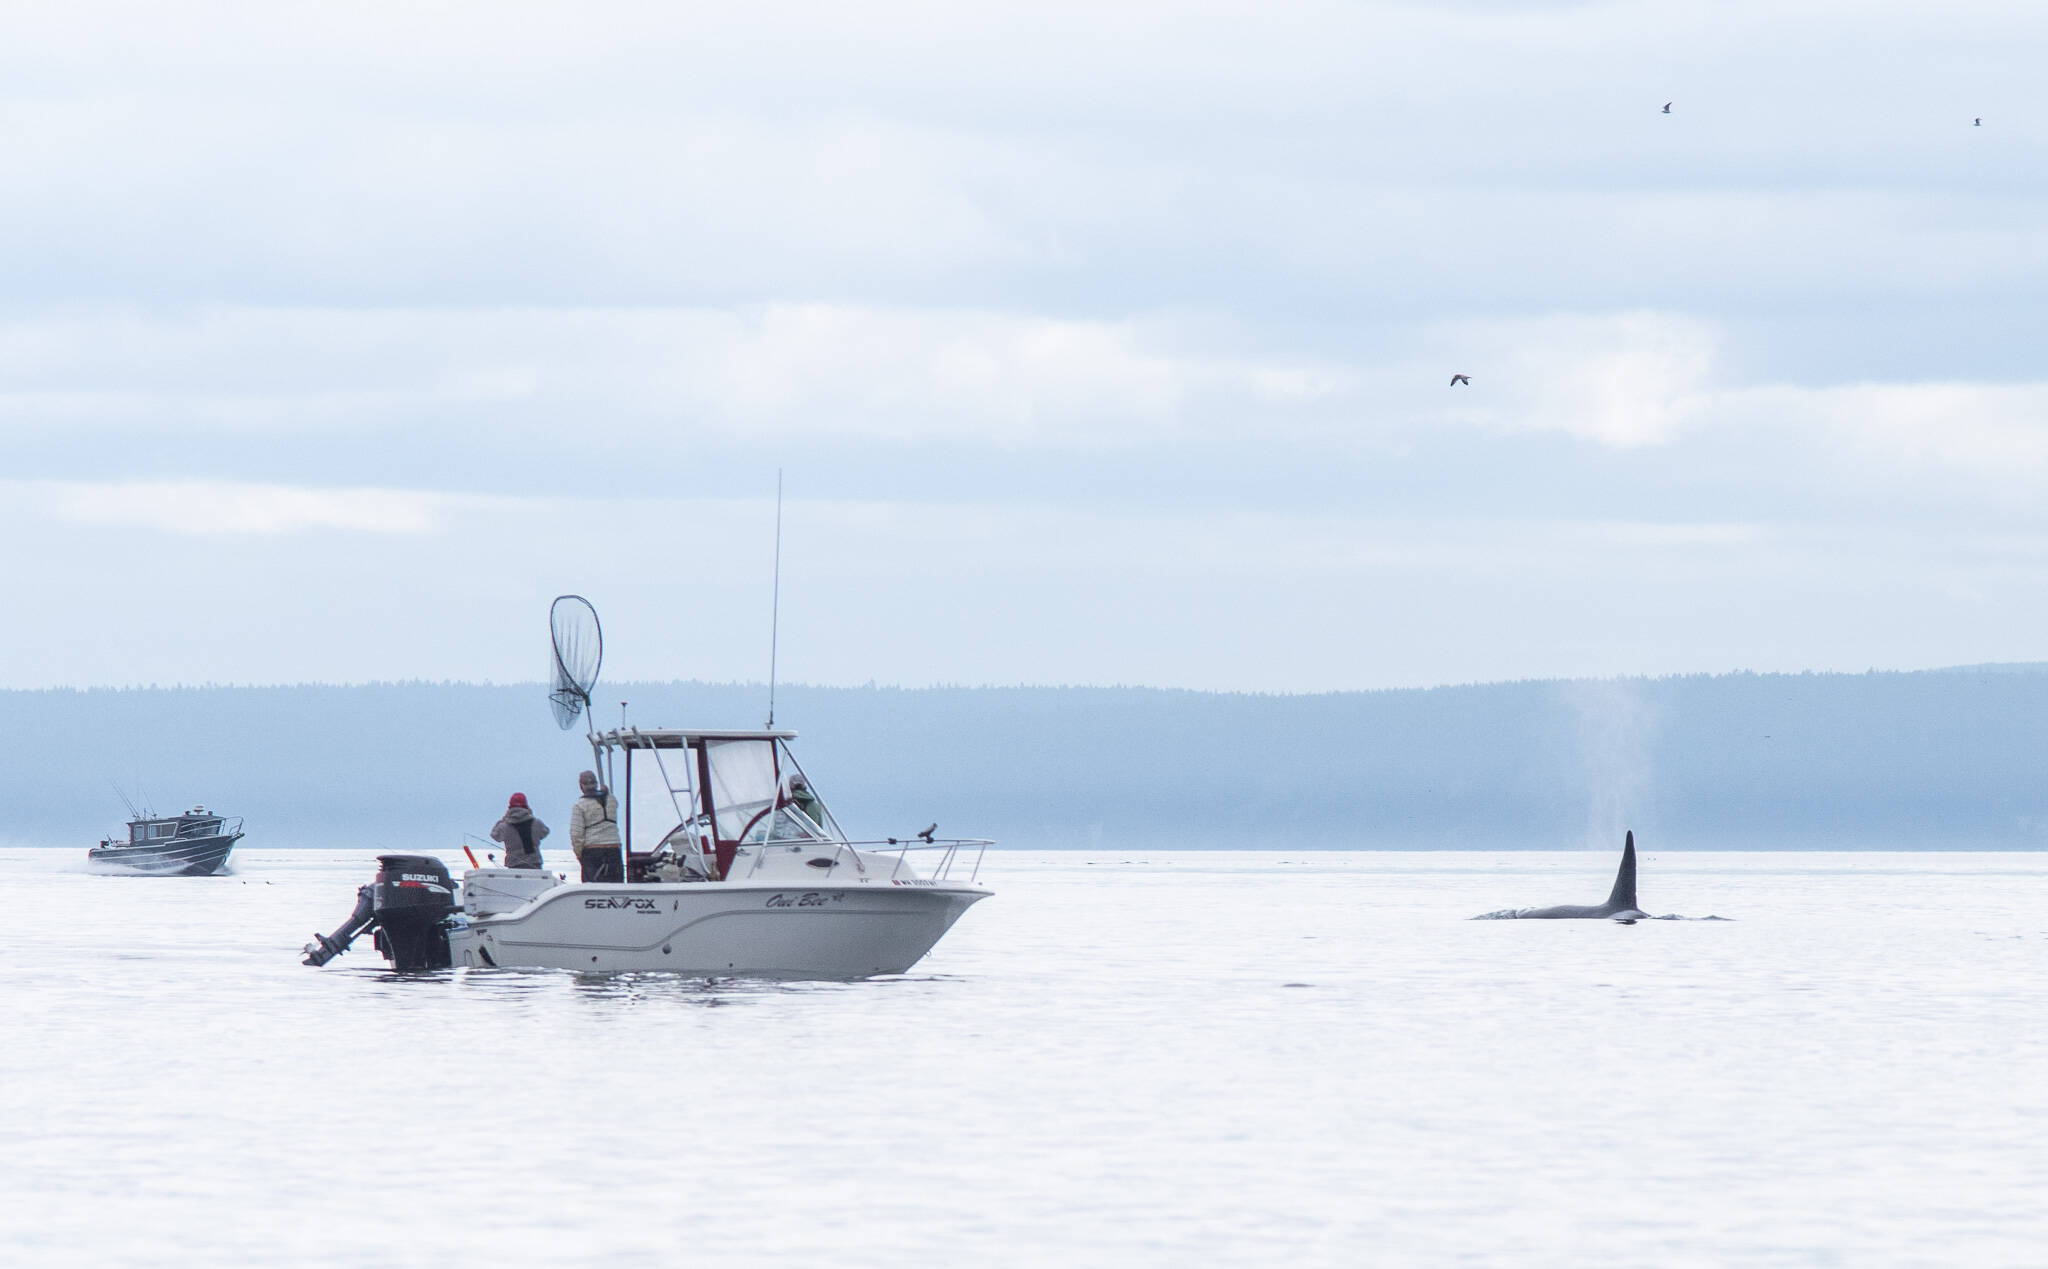 One of the duties of the Washington Department of Fish and Wildlife police is to make sure boats do not get too close to orcas. The whales and the boat are too close here, but in this case, it appeared that the transient whales (a trio that has been seen in the area often lately) moved closer to the boat. During a discussion with the WDFW policemen on patrol, the fisherman stated they hadn’t immediately noticed the whales and when they did notice, they moved. (Emily Matthiessen /Olympic Peninsula News Group)